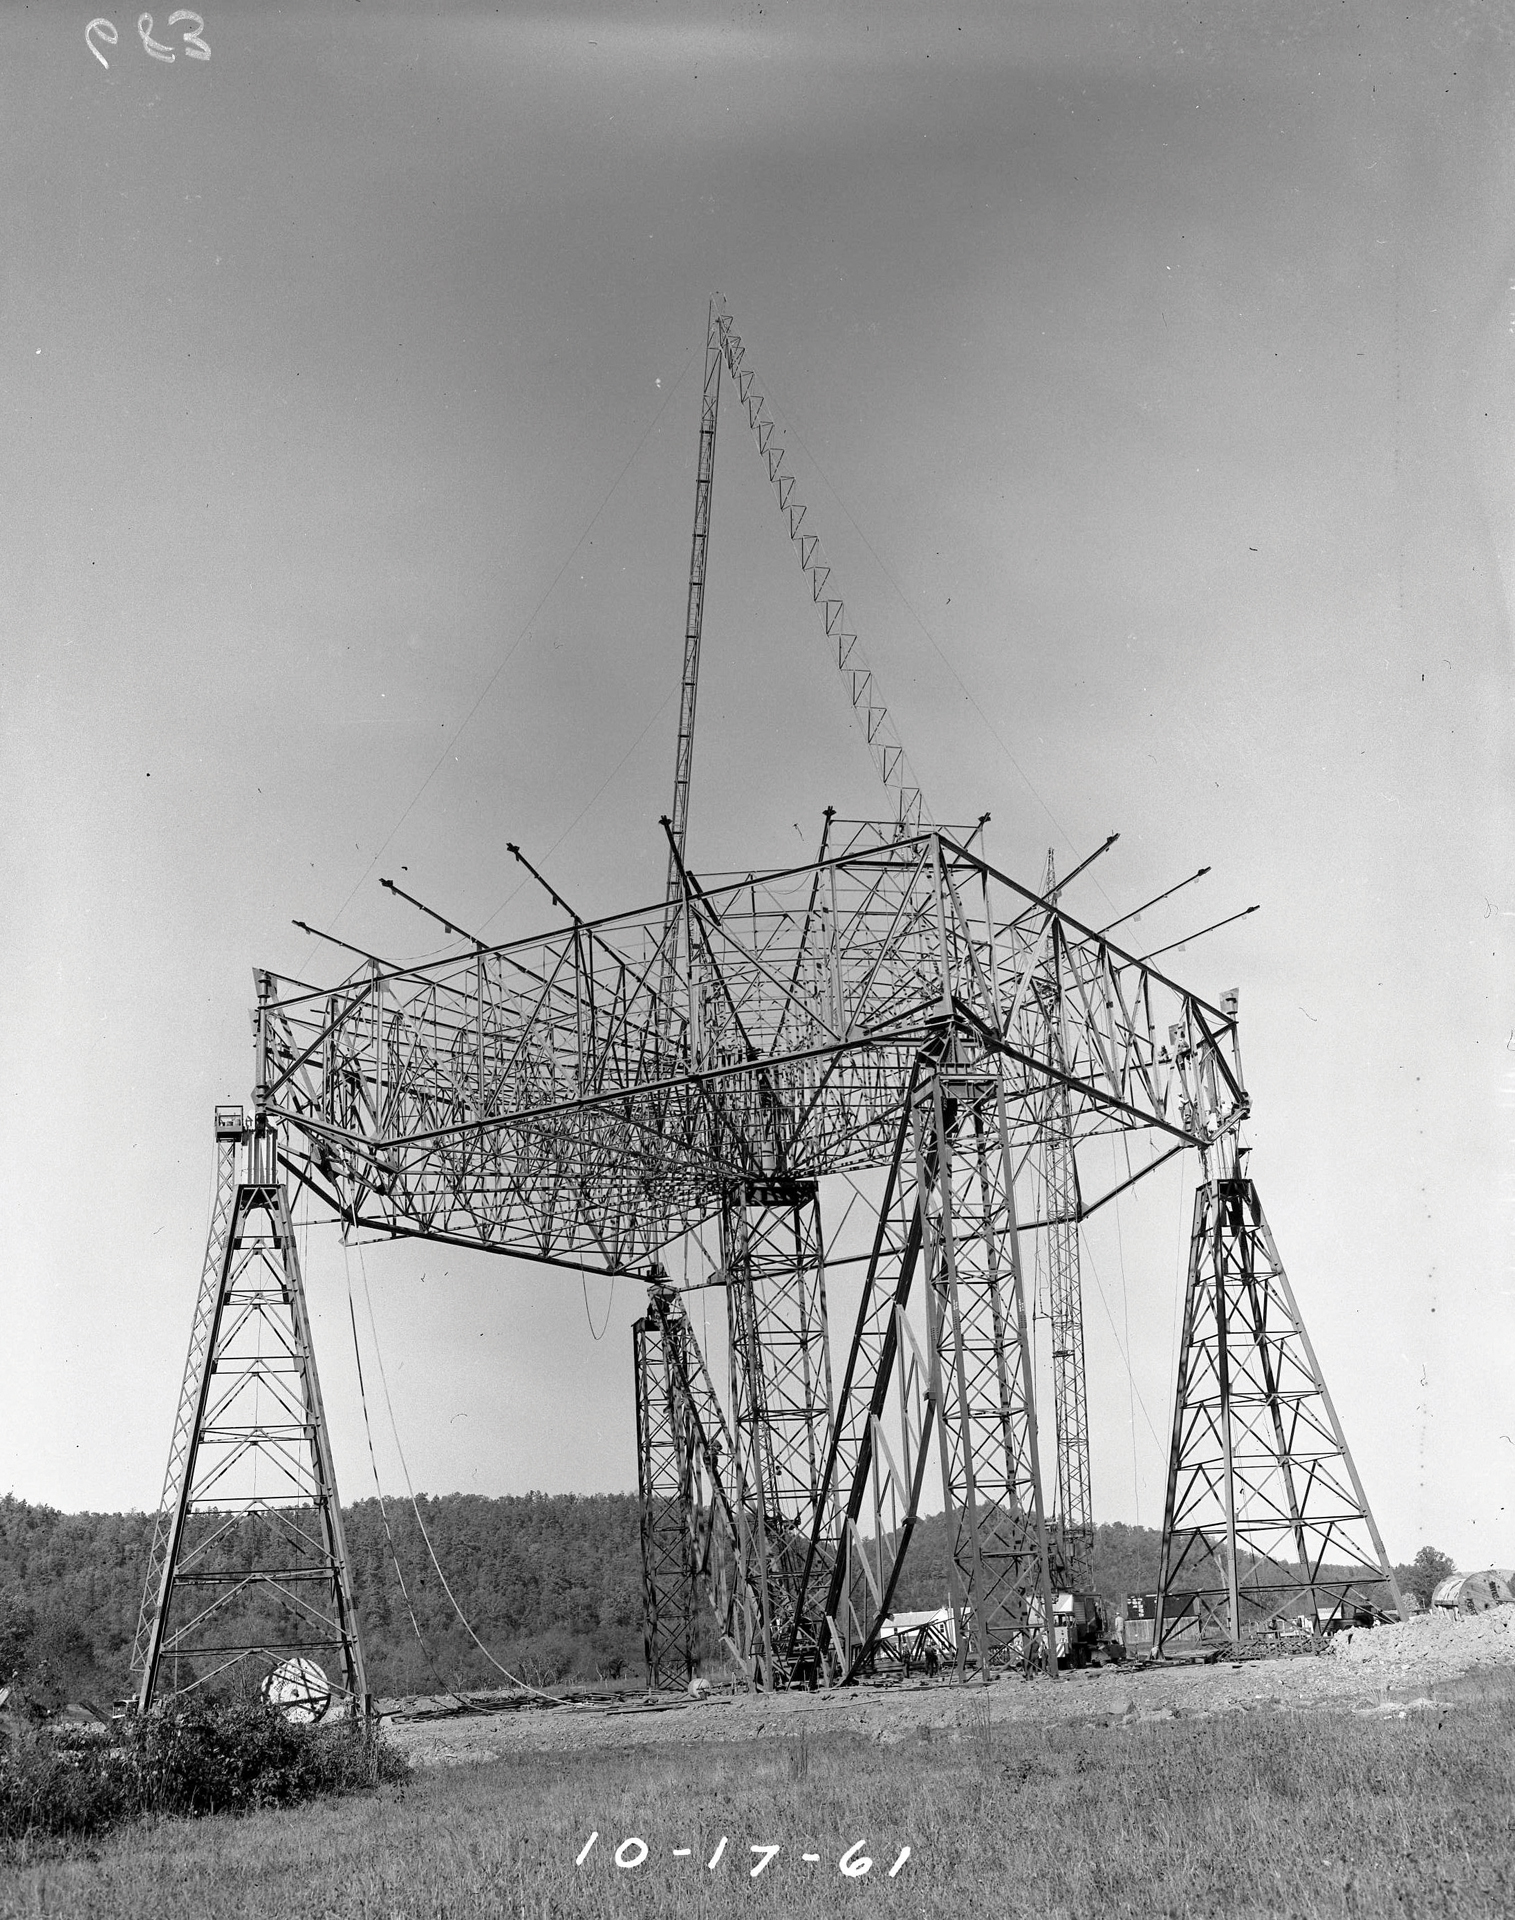 Construction of the 300-foot telescope